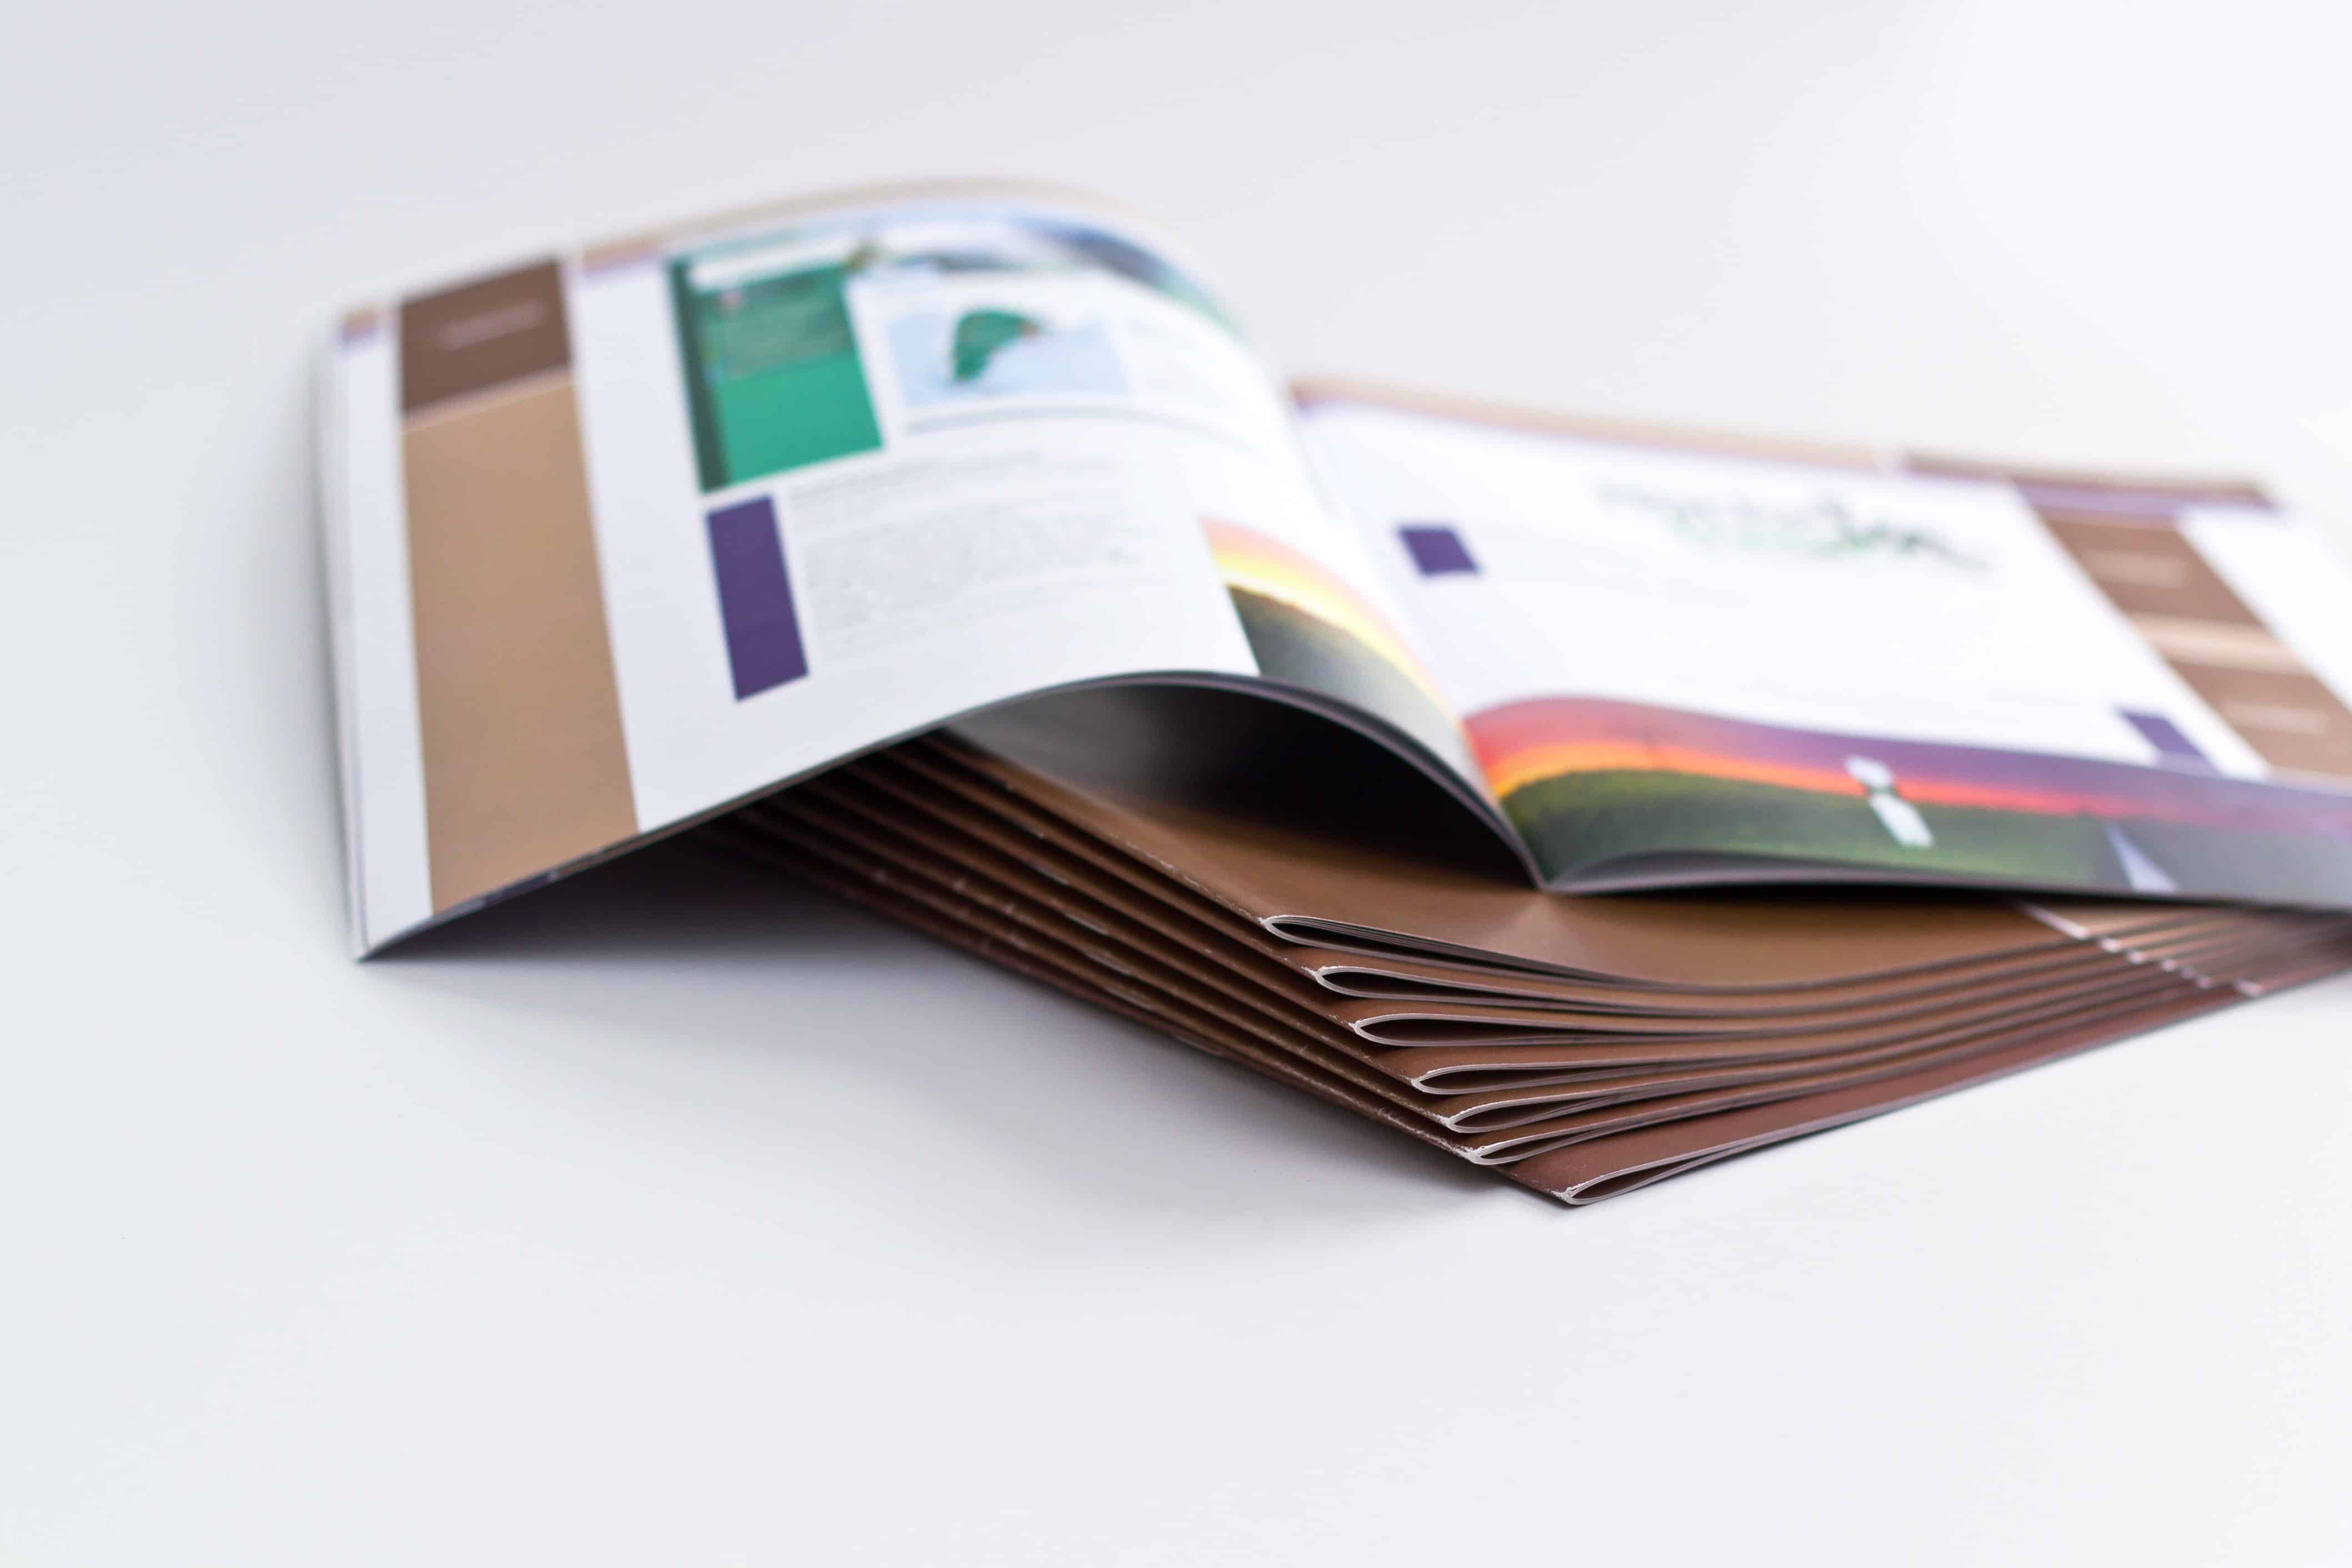 Booklet printing cheap, saddle stitched booklet printing